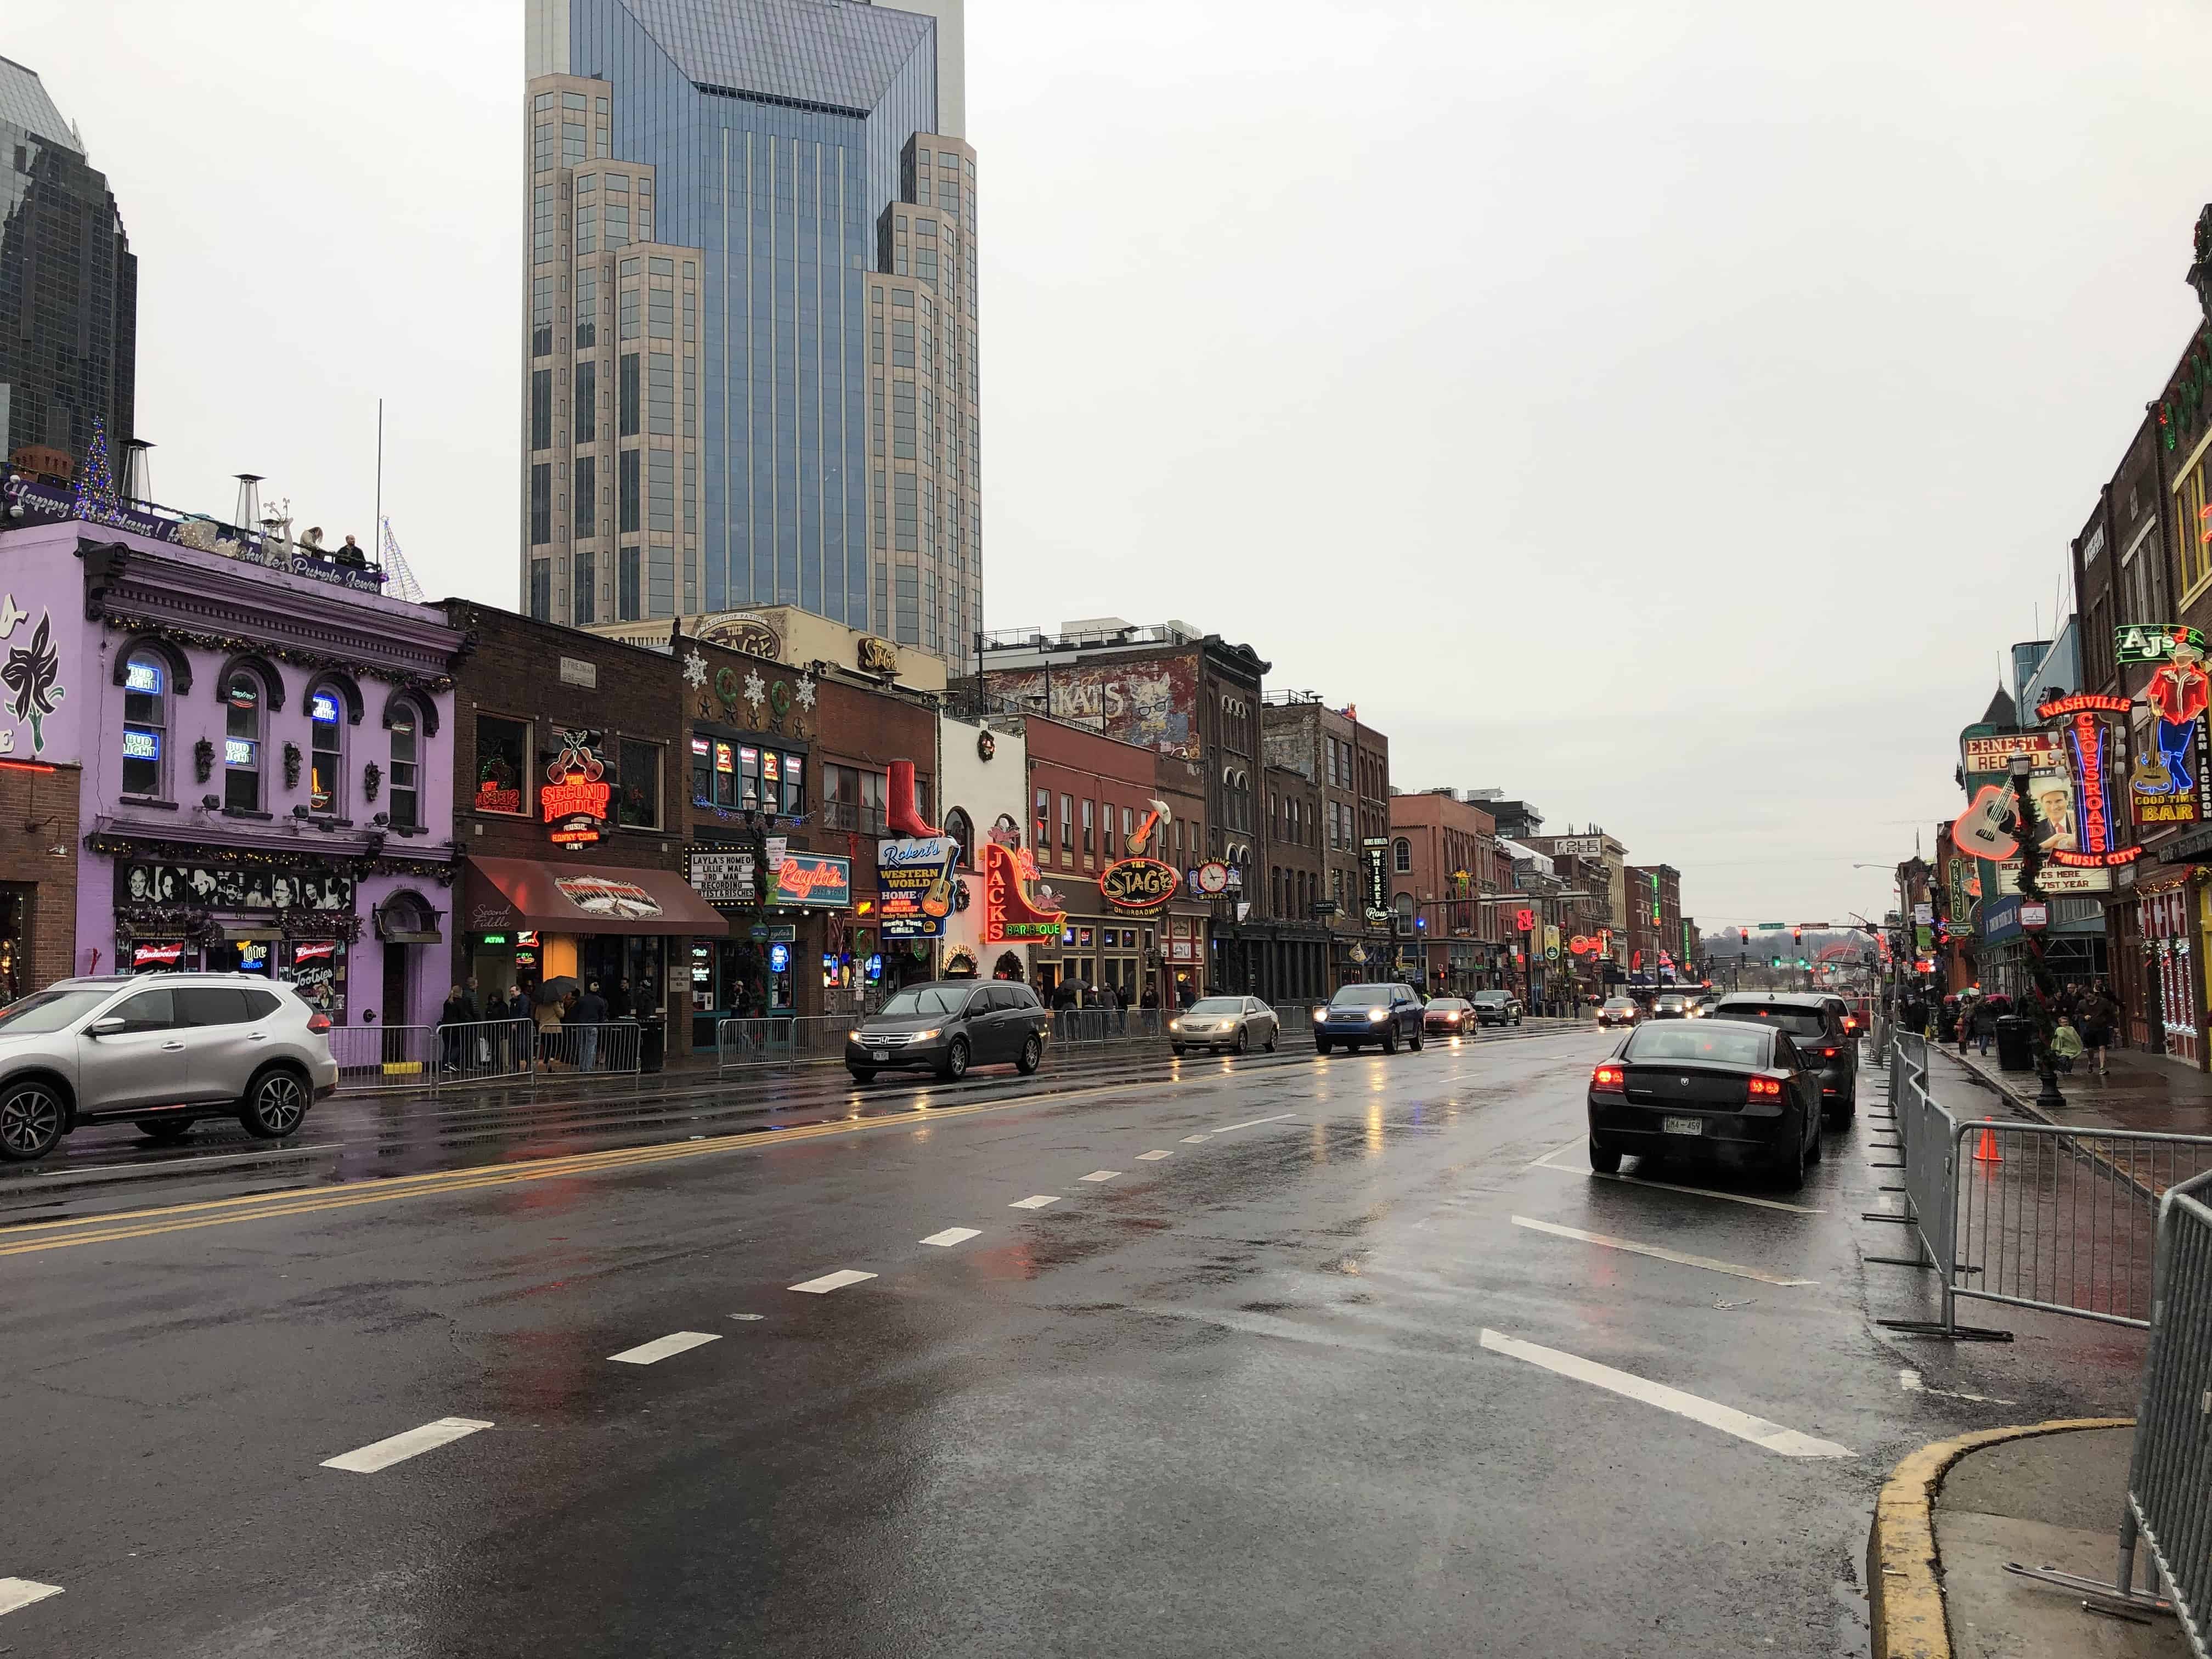 Looking down lower Broadway in December 2018 in Nashville, Tennessee